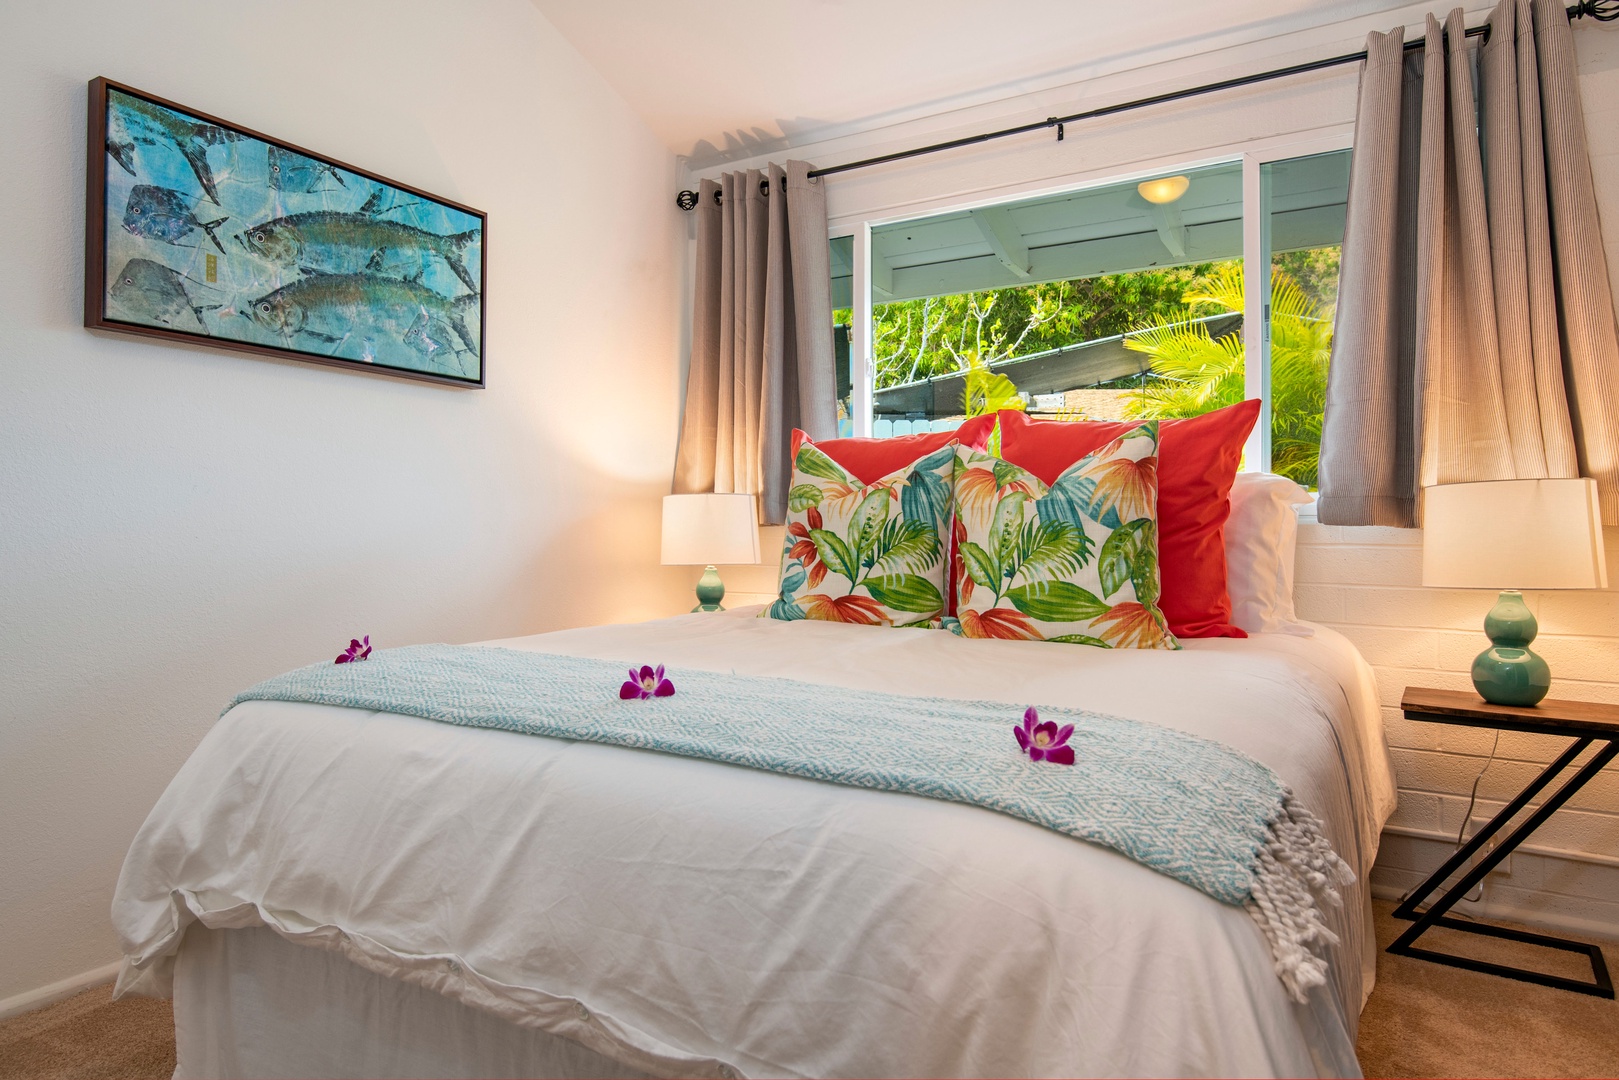 Honolulu Vacation Rentals, Holoholo Hale - Bedroom 2 - Queen bed, split ac with back yard garden and jacuzzi views.